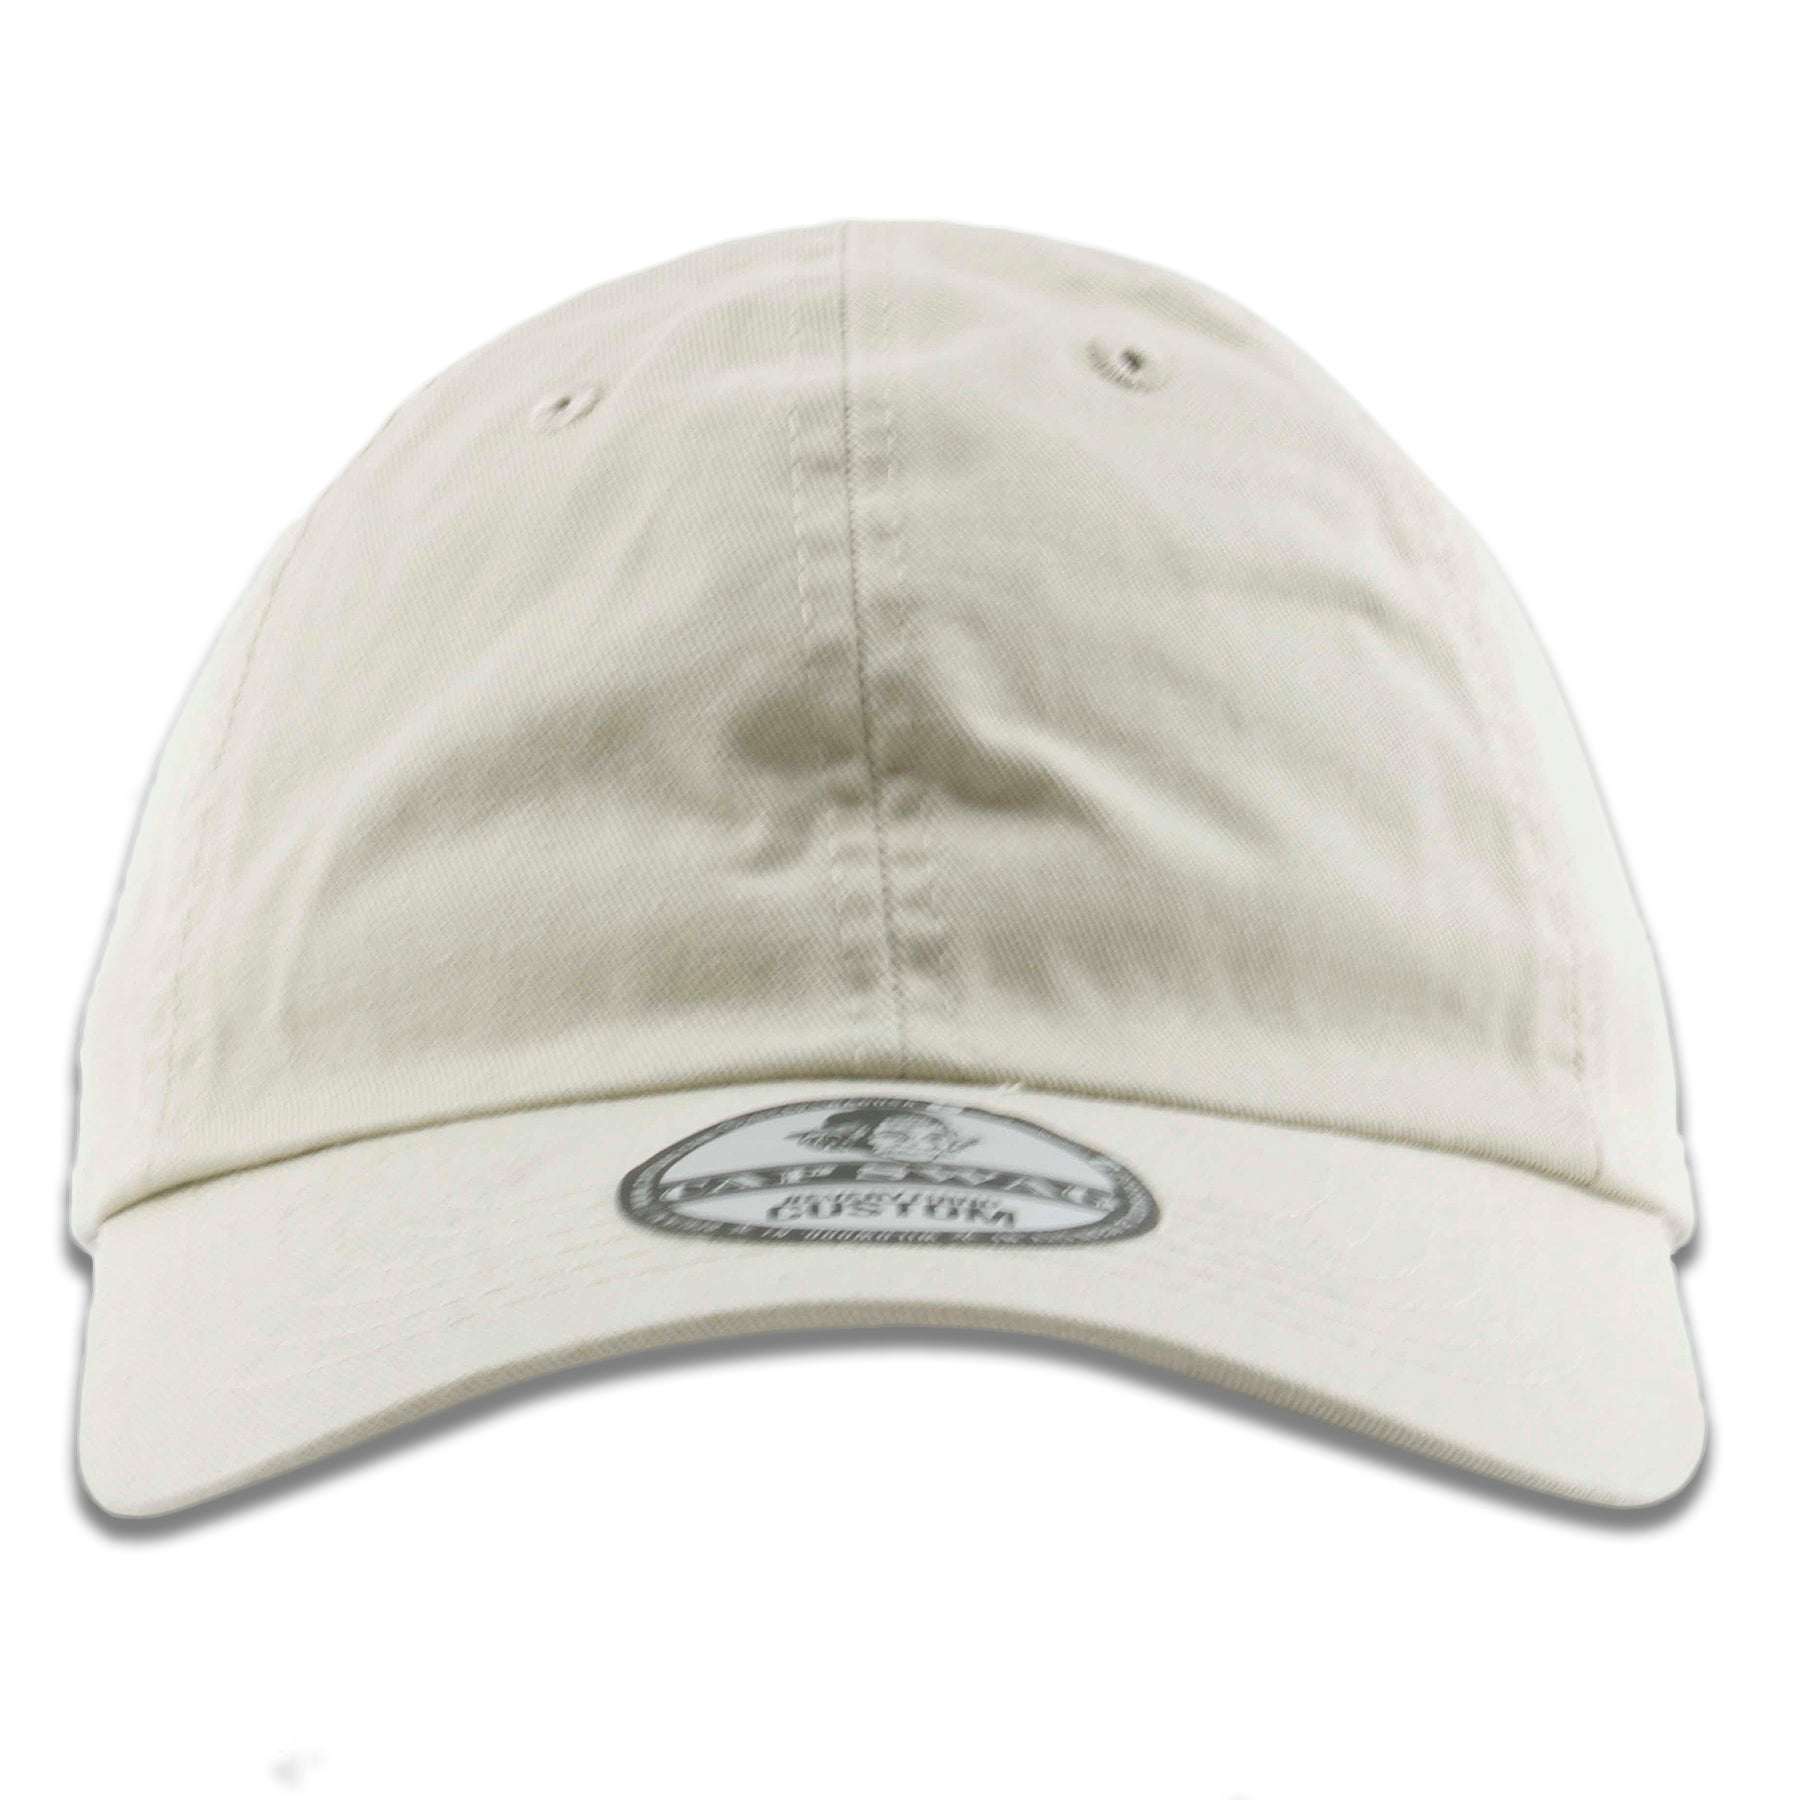 The ivory blank baseball cap has a soft unstructured crown and a bent brim